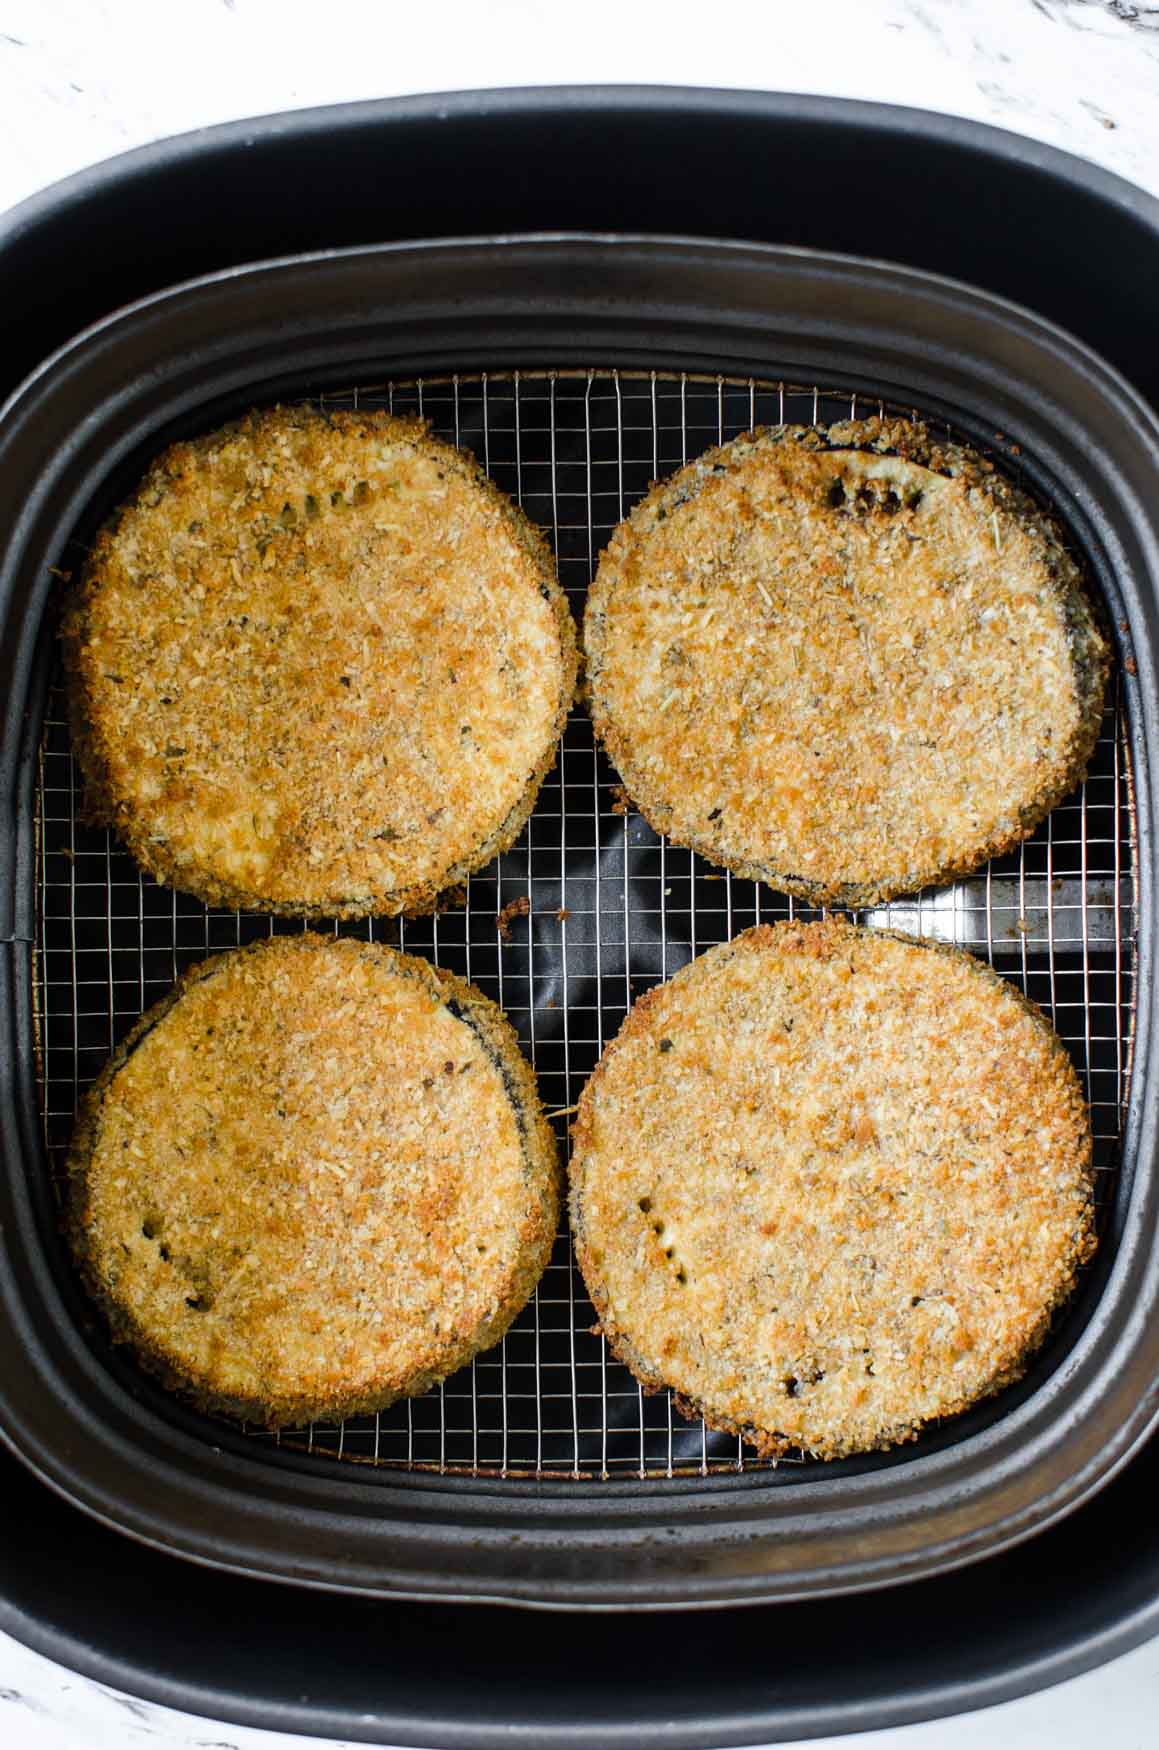 Healthy & easy Eggplant Parmesan fried in Air Fryer for the perfect crispy crust that exactly mimics the deep fried texture. Learn tips for perfect & mess free coating the eggplant slices with breadcrumbs. | #watchwhatueat #healthyrecipes #eggplant #eggplantparmesan #airfryer